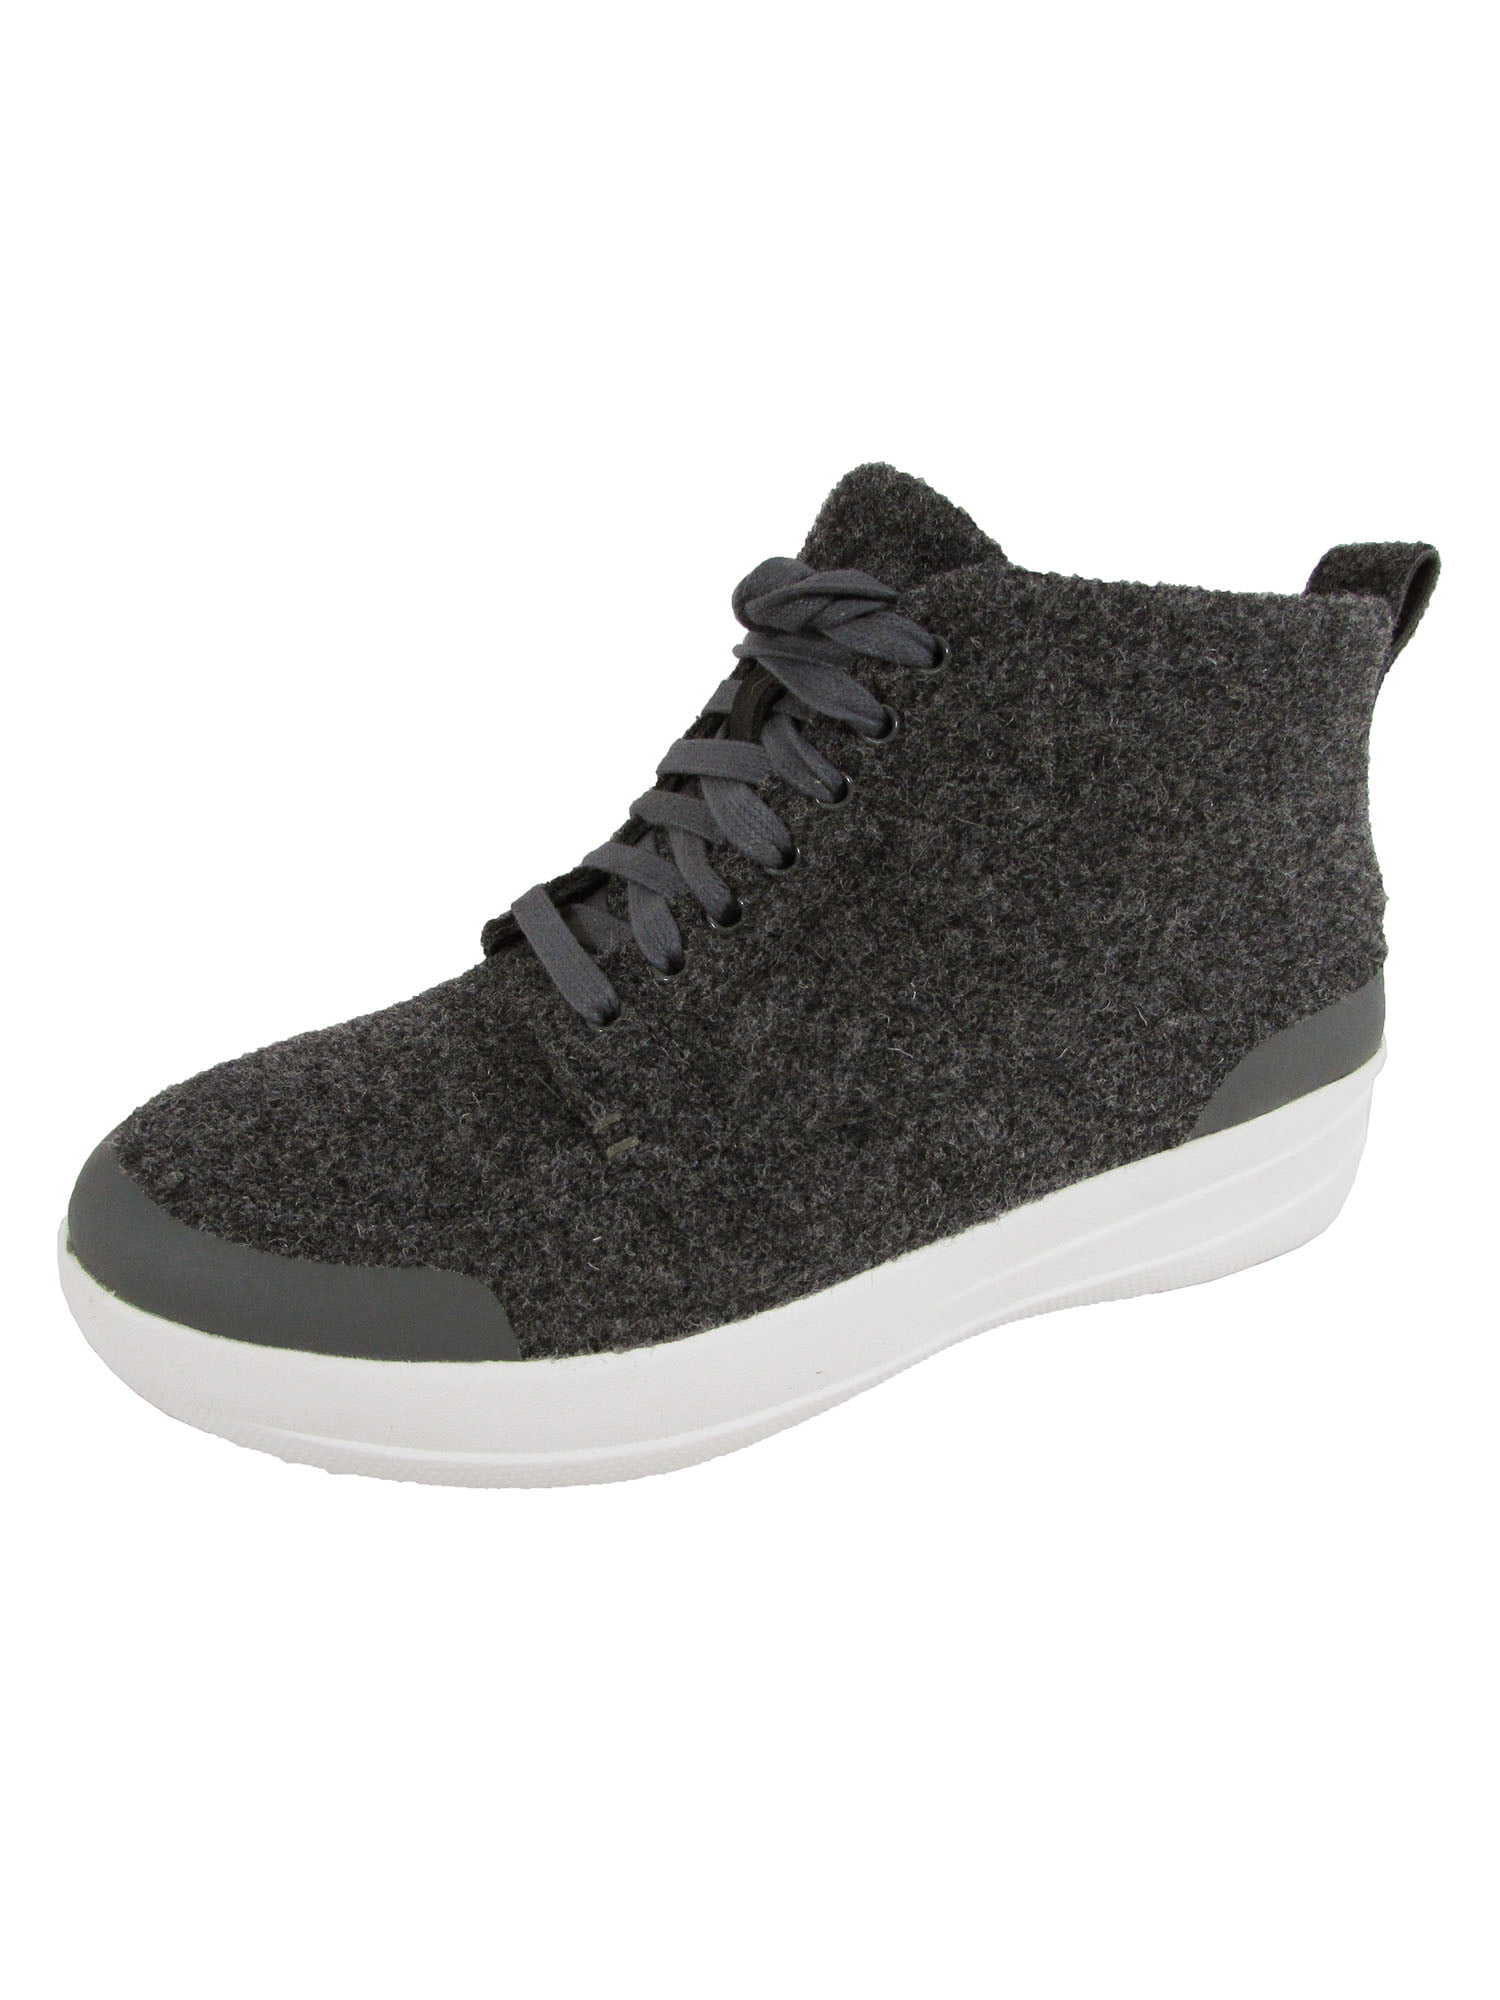 Fitflop Womens Stefanie Wool High Top Sneaker Shoes, Charcoal, US 5 ...